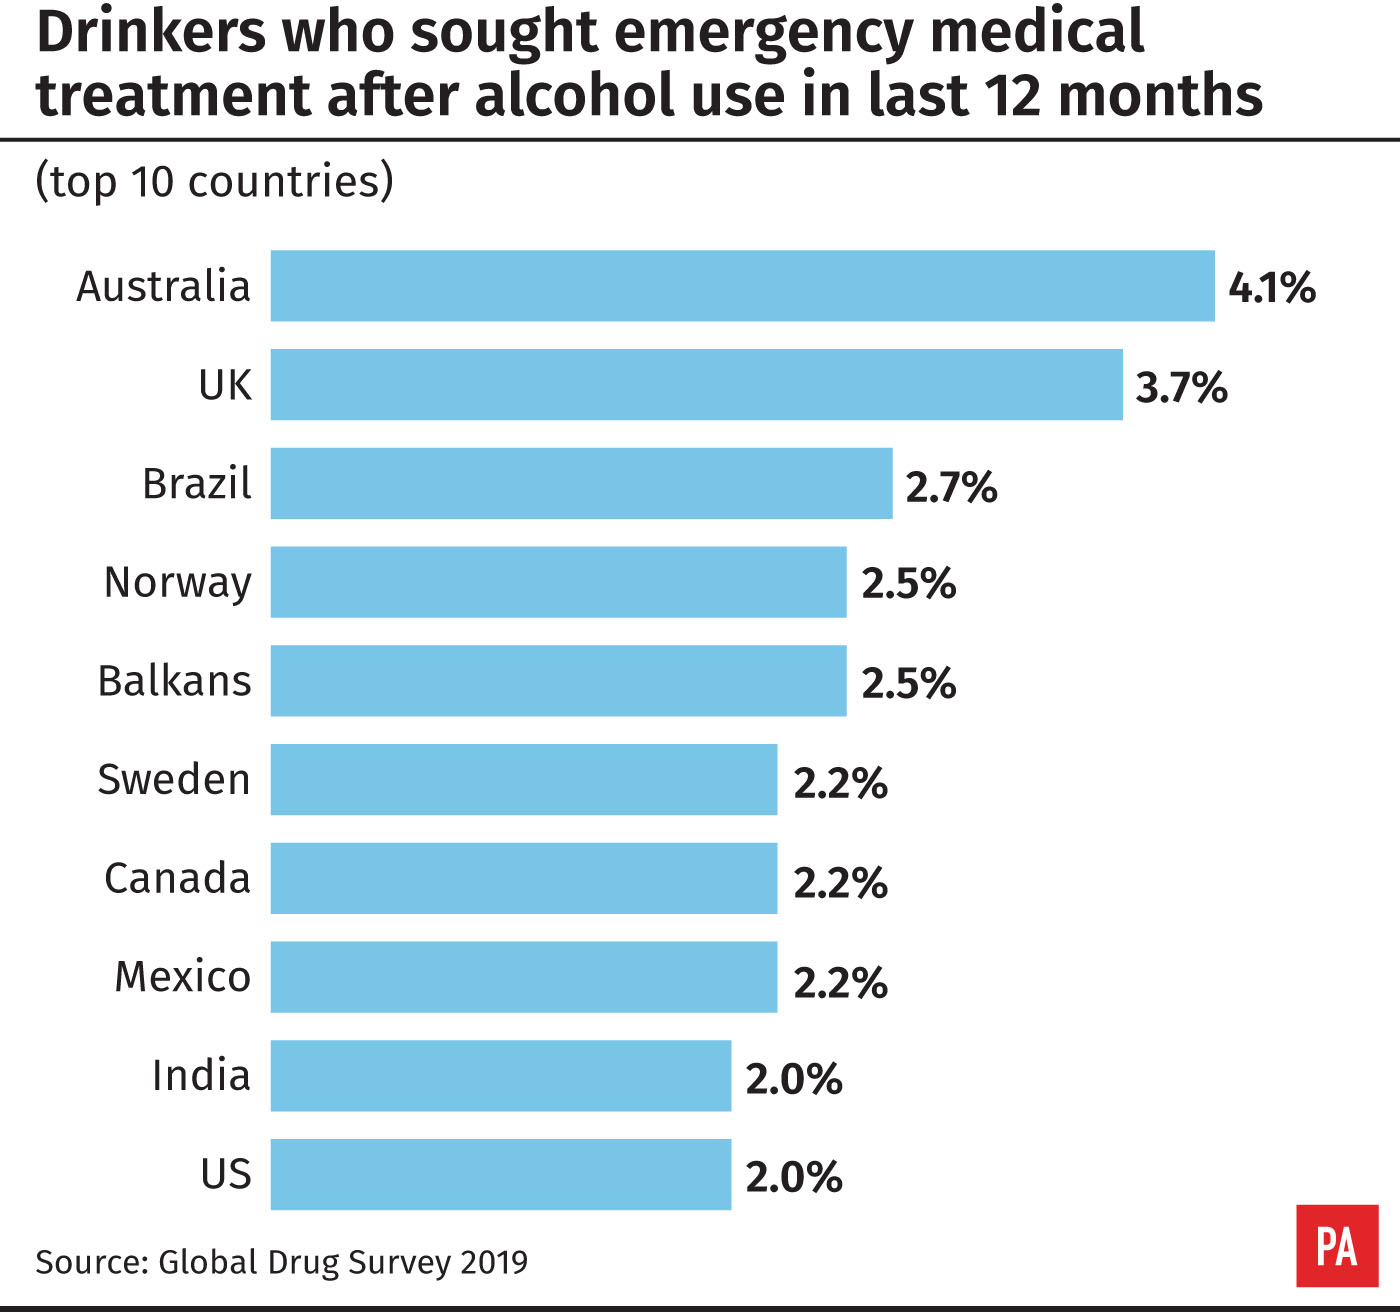 Drinkers who sought emergency medical treatment after alcohol use in last 12 months